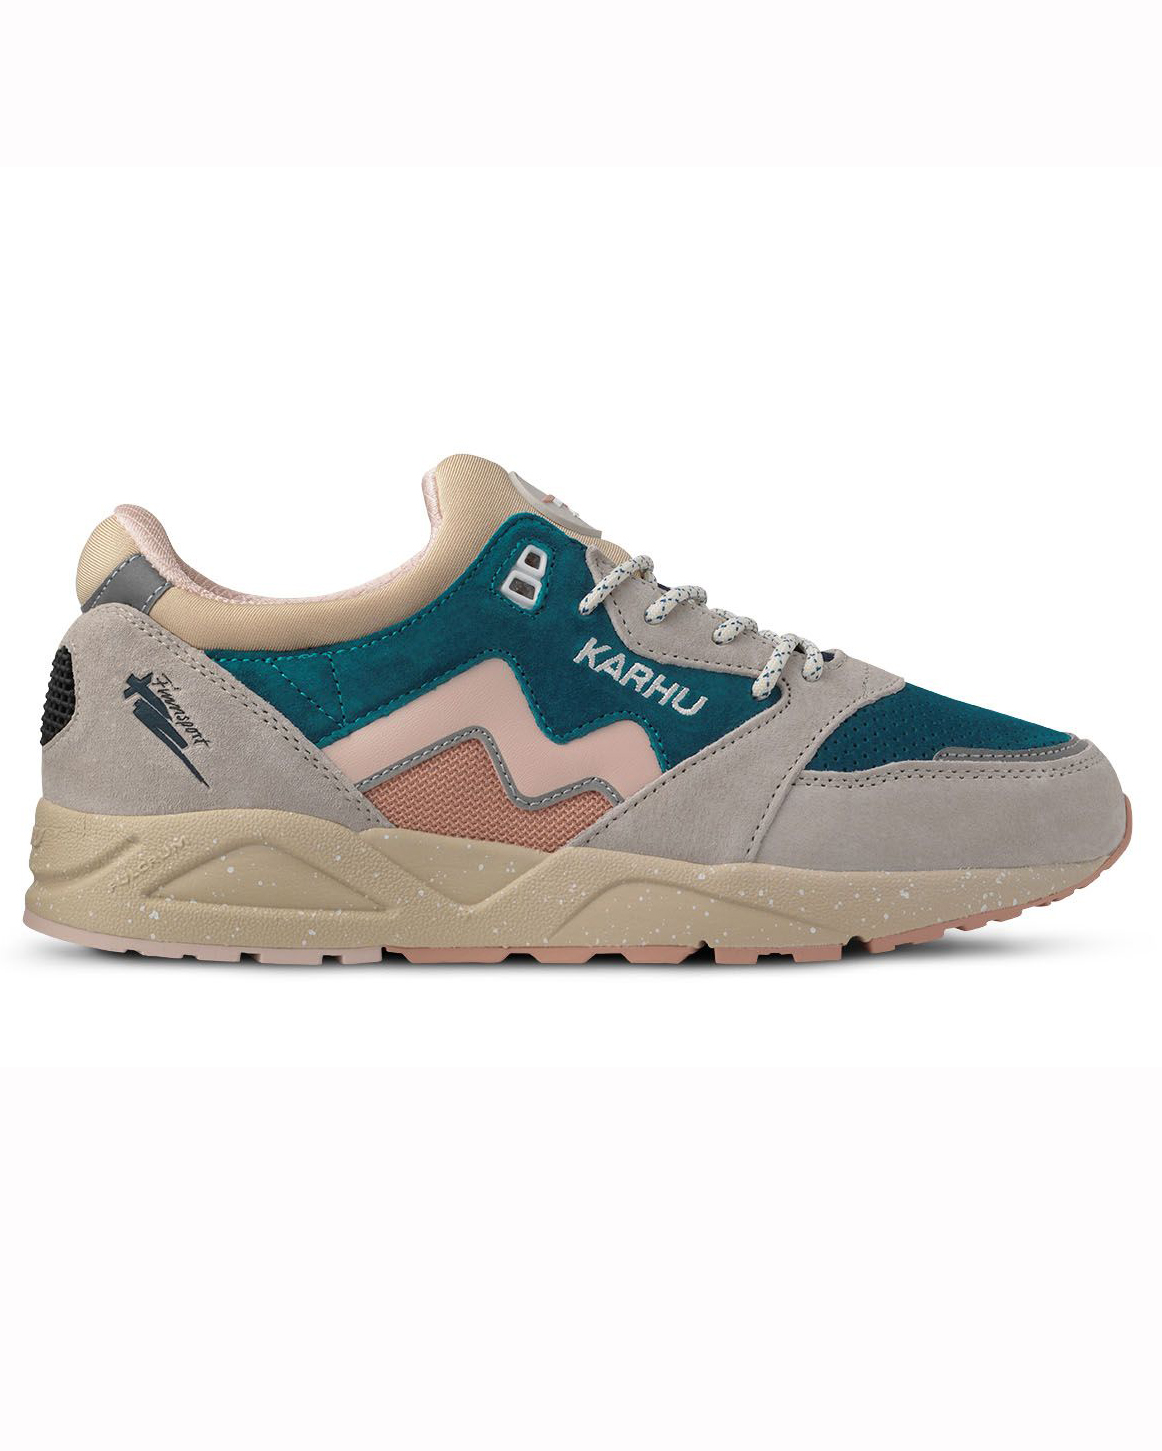 Sneakers Aria 95 - Silver Lining/ Peach Whip  - 38